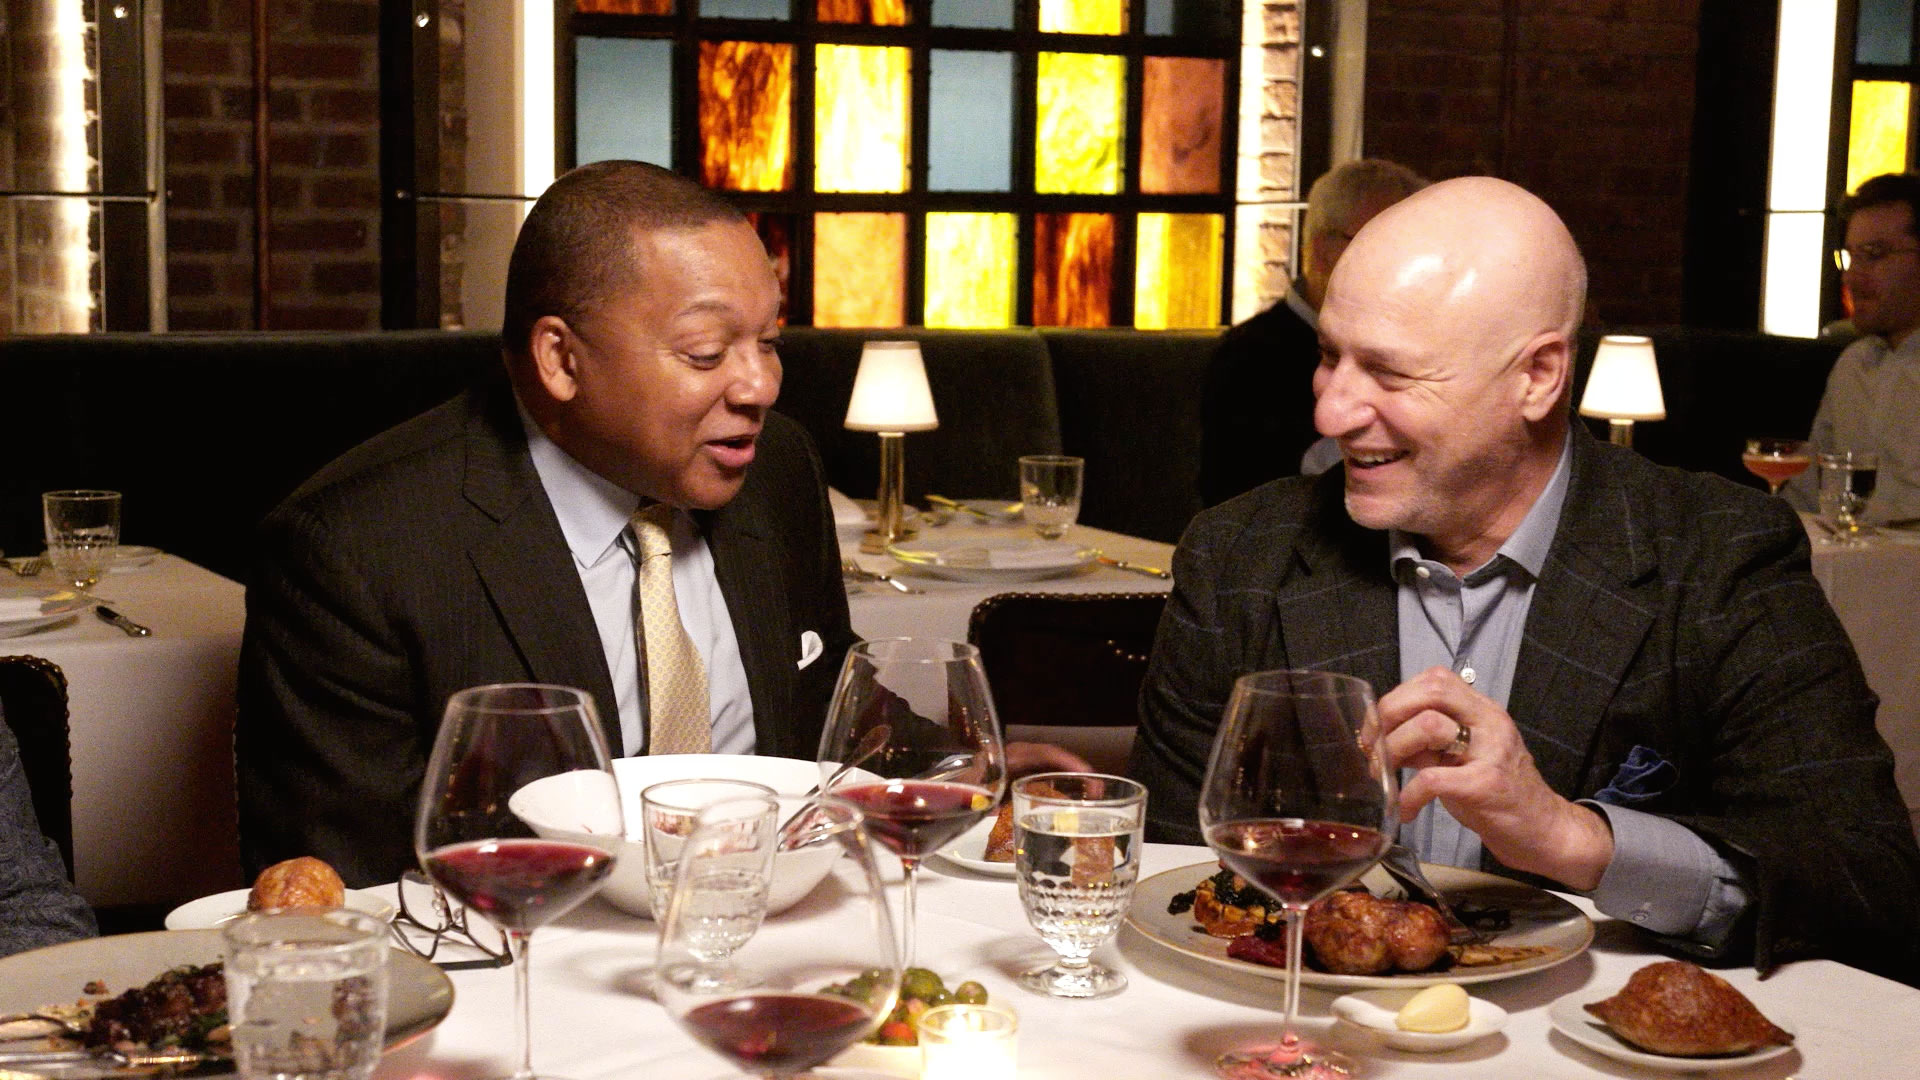 Culinary Star Tom Colicchio and Music Legend Wynton Marsalis Relate Over the Skill of Improvising